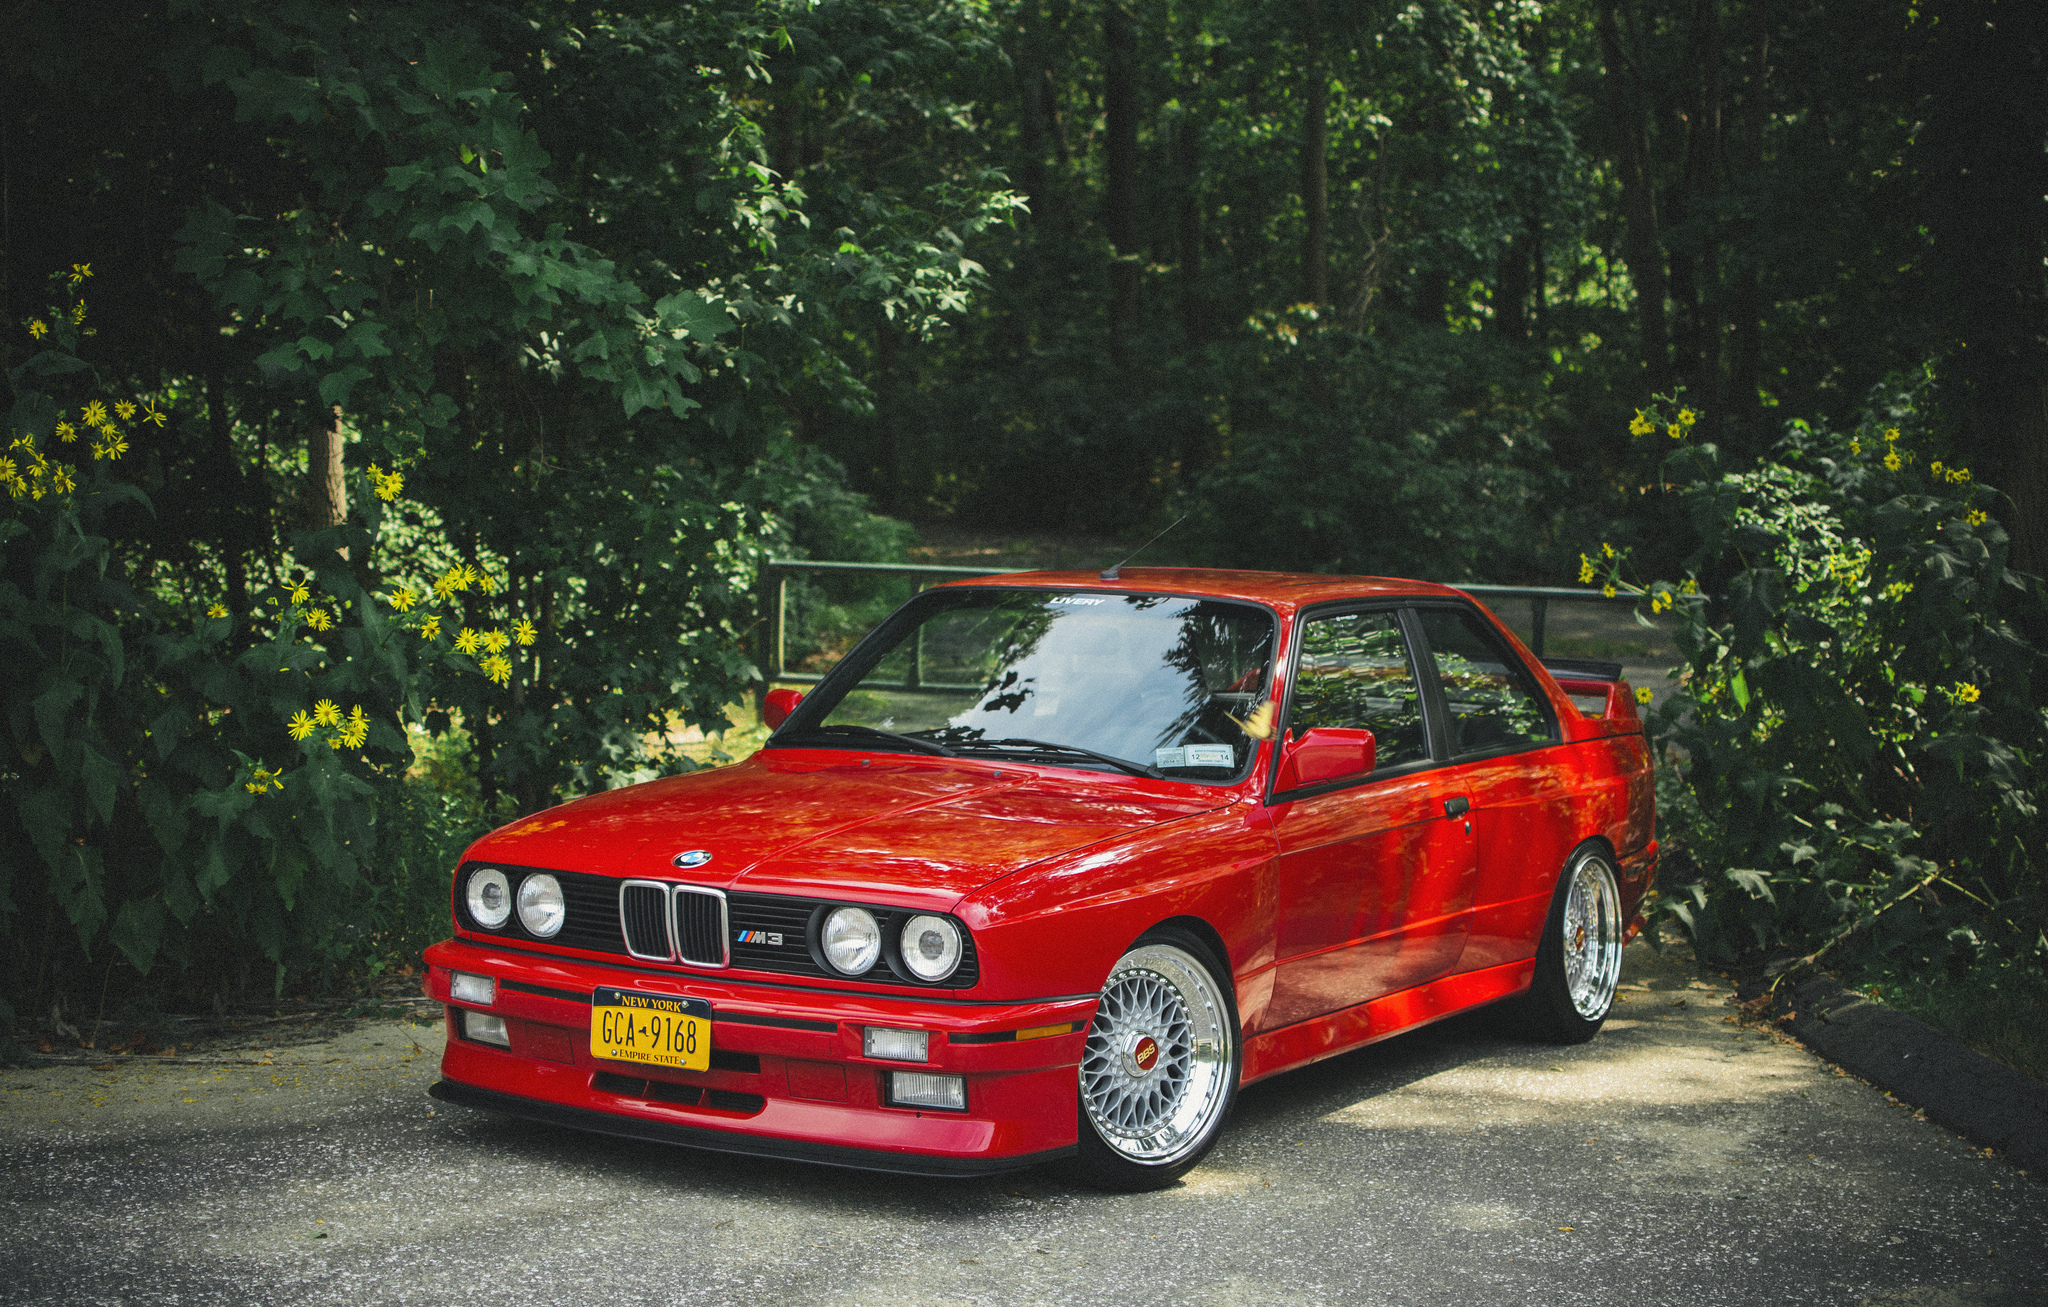 Wallpaper Bmw E30 M3 Red Tuning Car Pictures And